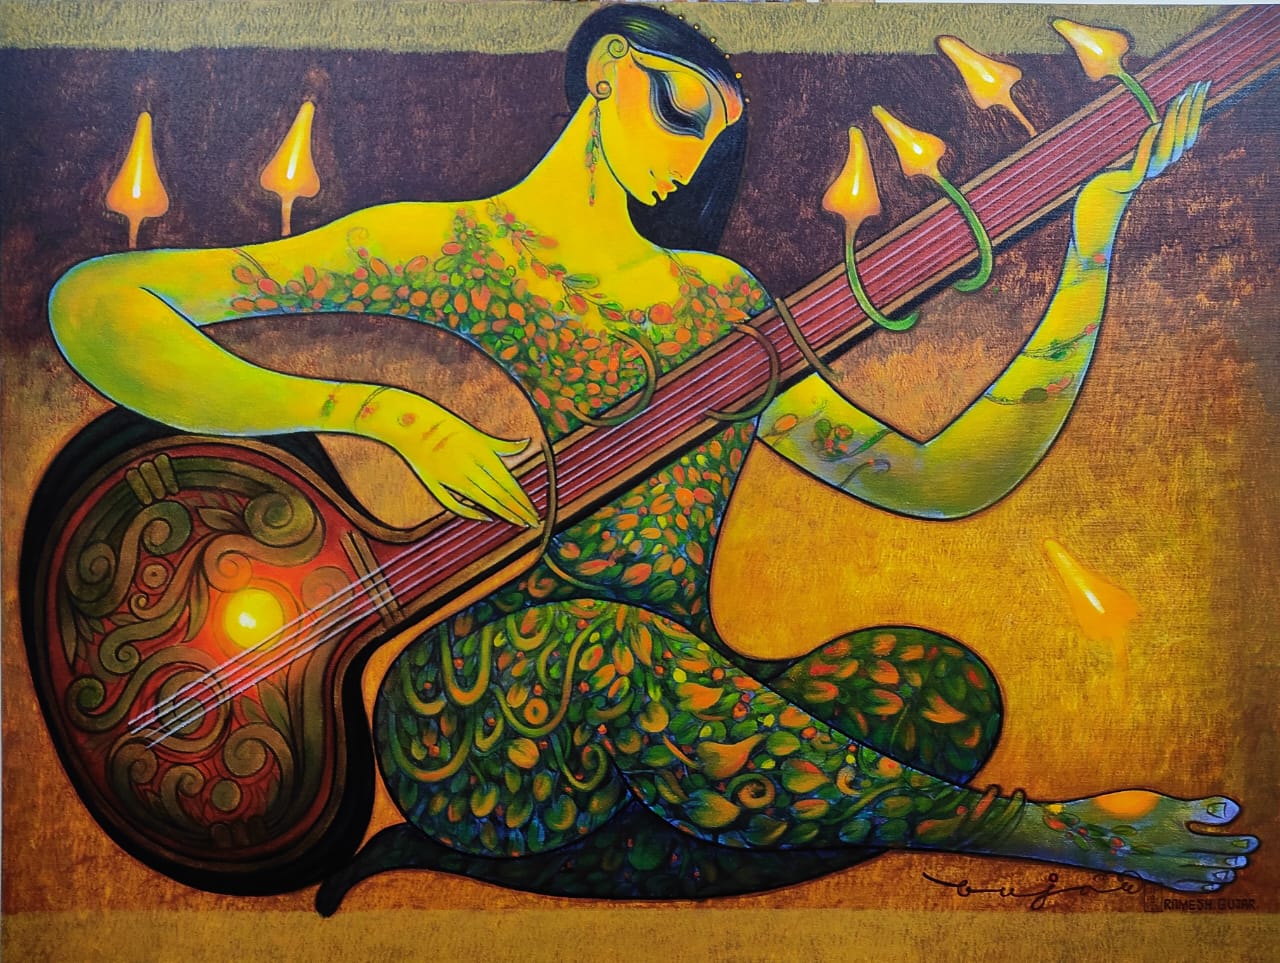 Figurative Painting with Acrylic on Canvas "Sitar (1989)" art by Ramesh P Gujar